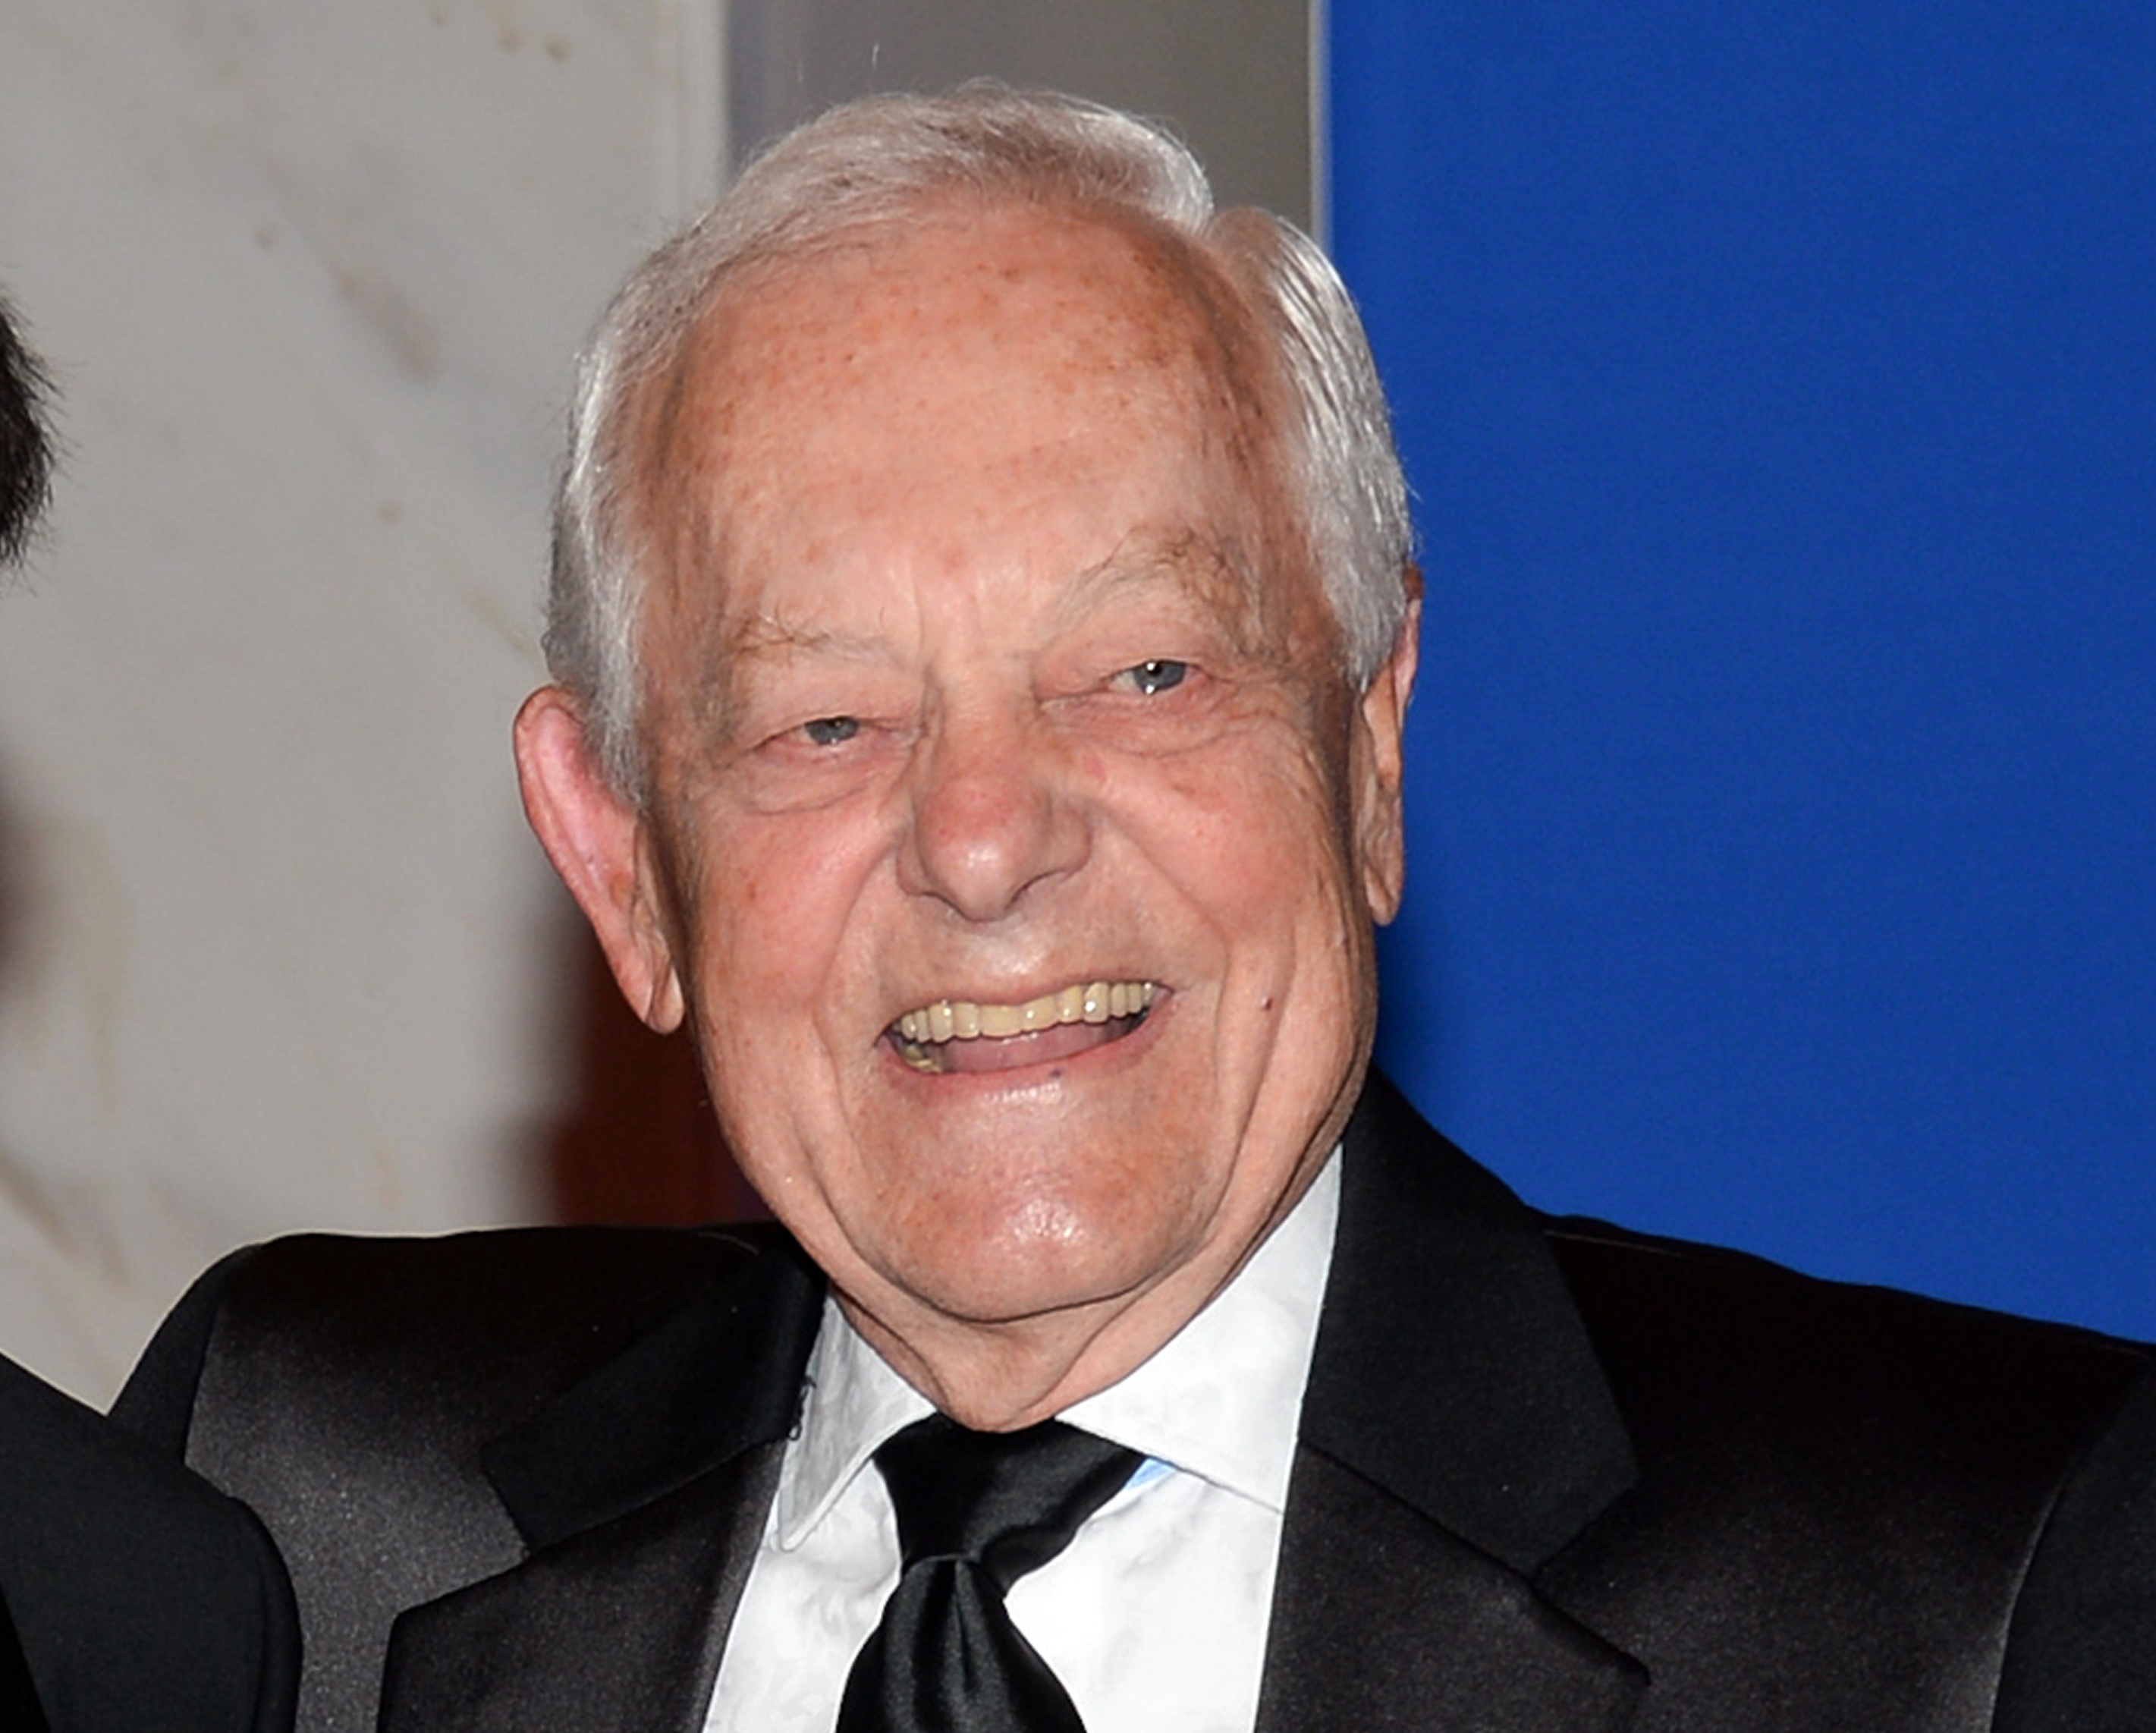  In this May 3, 2014, file photo, CBS News anchor Bob Schieffer attends the White House Correspondents' Association Dinner at the Washington Hilton Hotel in Washington. (Photo by Evan Agostini/Invision/AP, File)